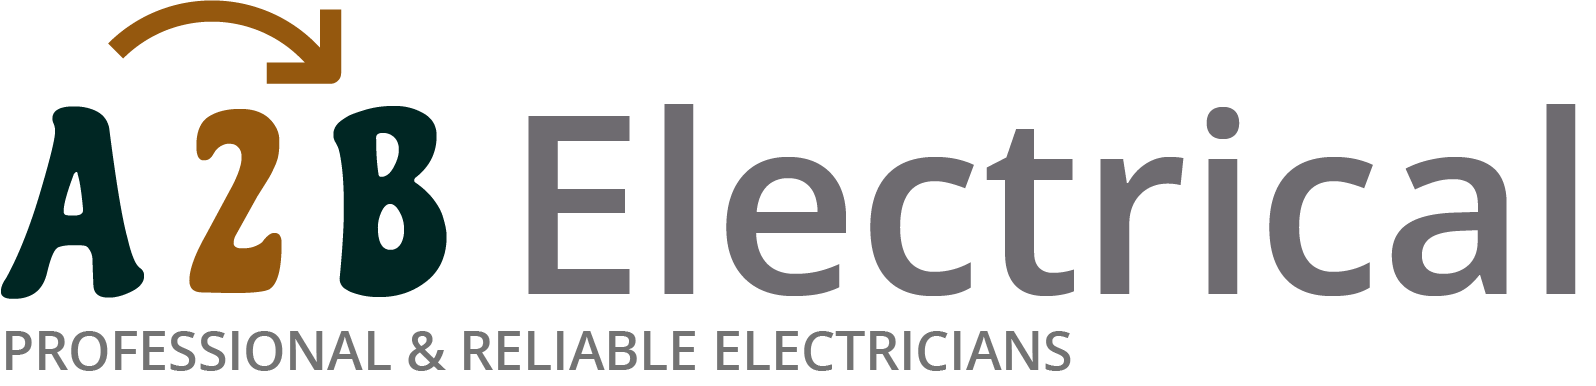 If you have electrical wiring problems in Chiswick, we can provide an electrician to have a look for you. 